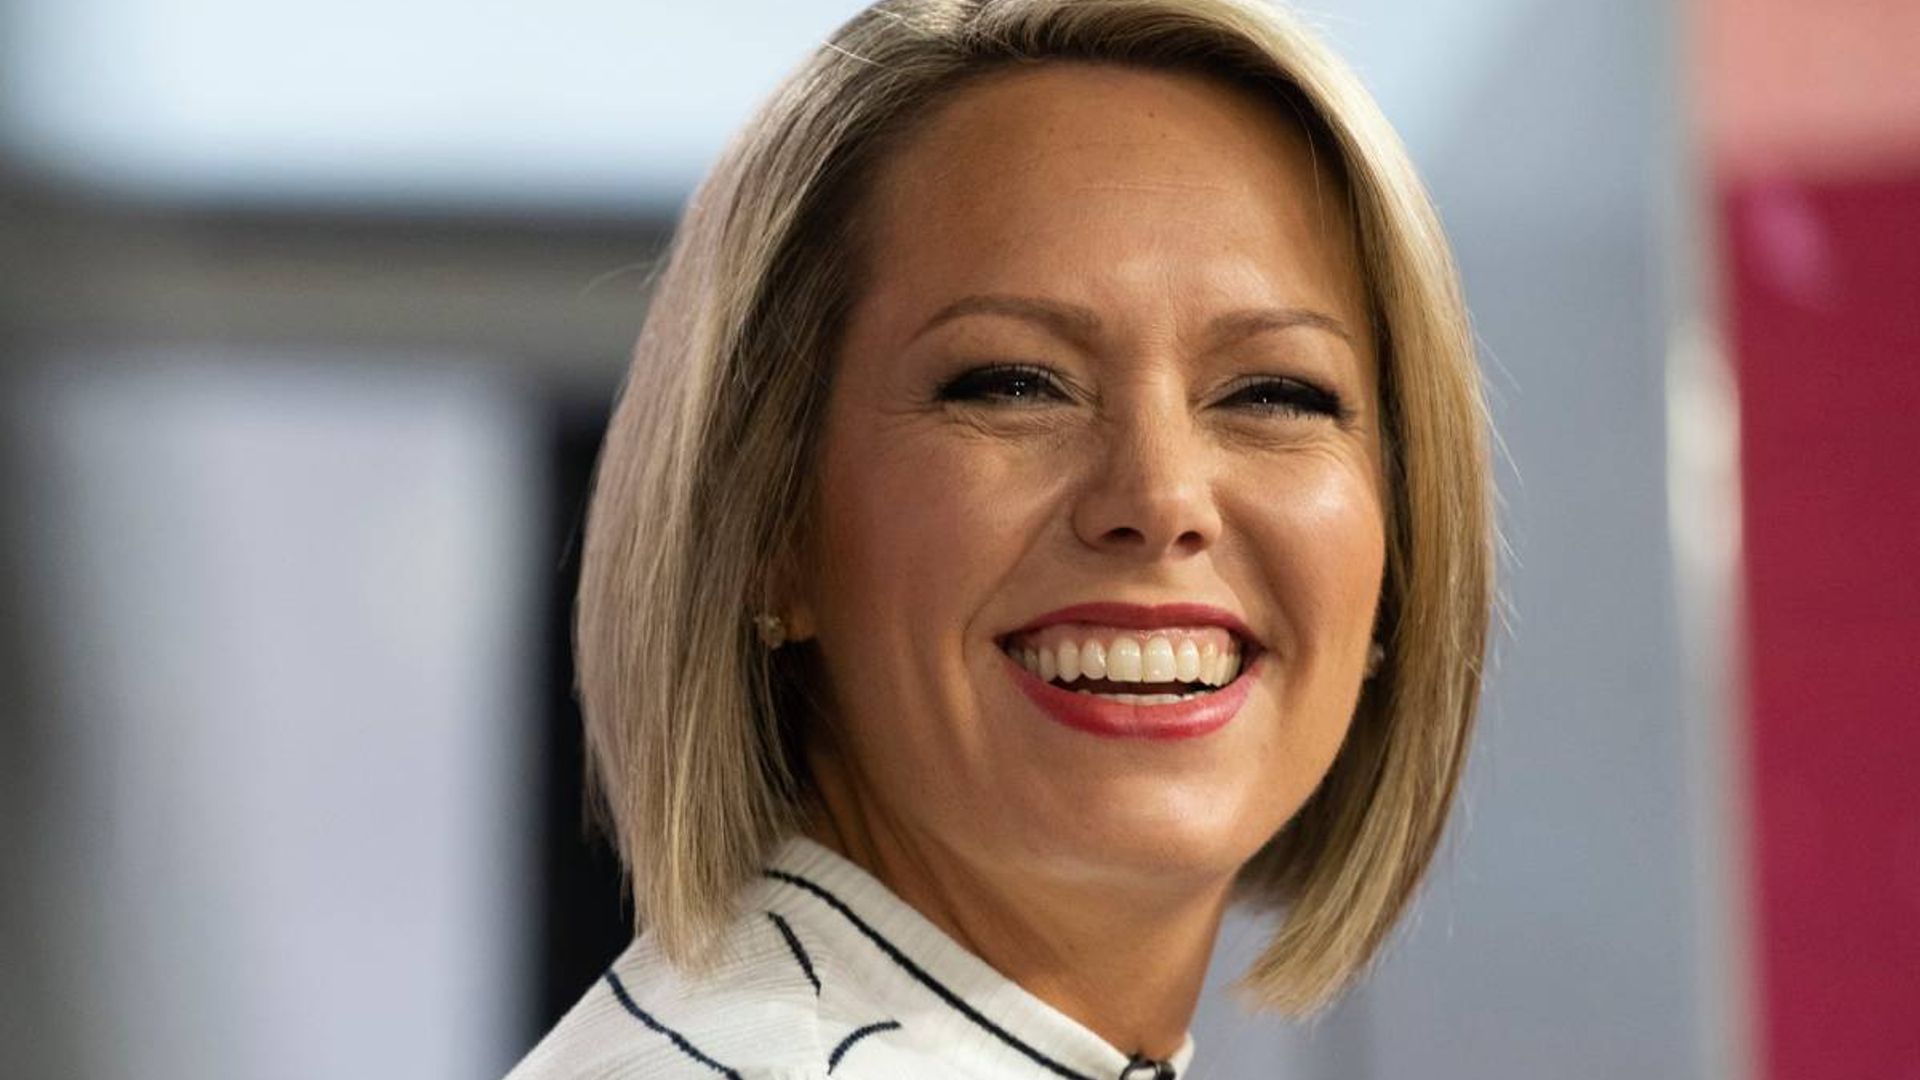 today dylan dreyer missing from show